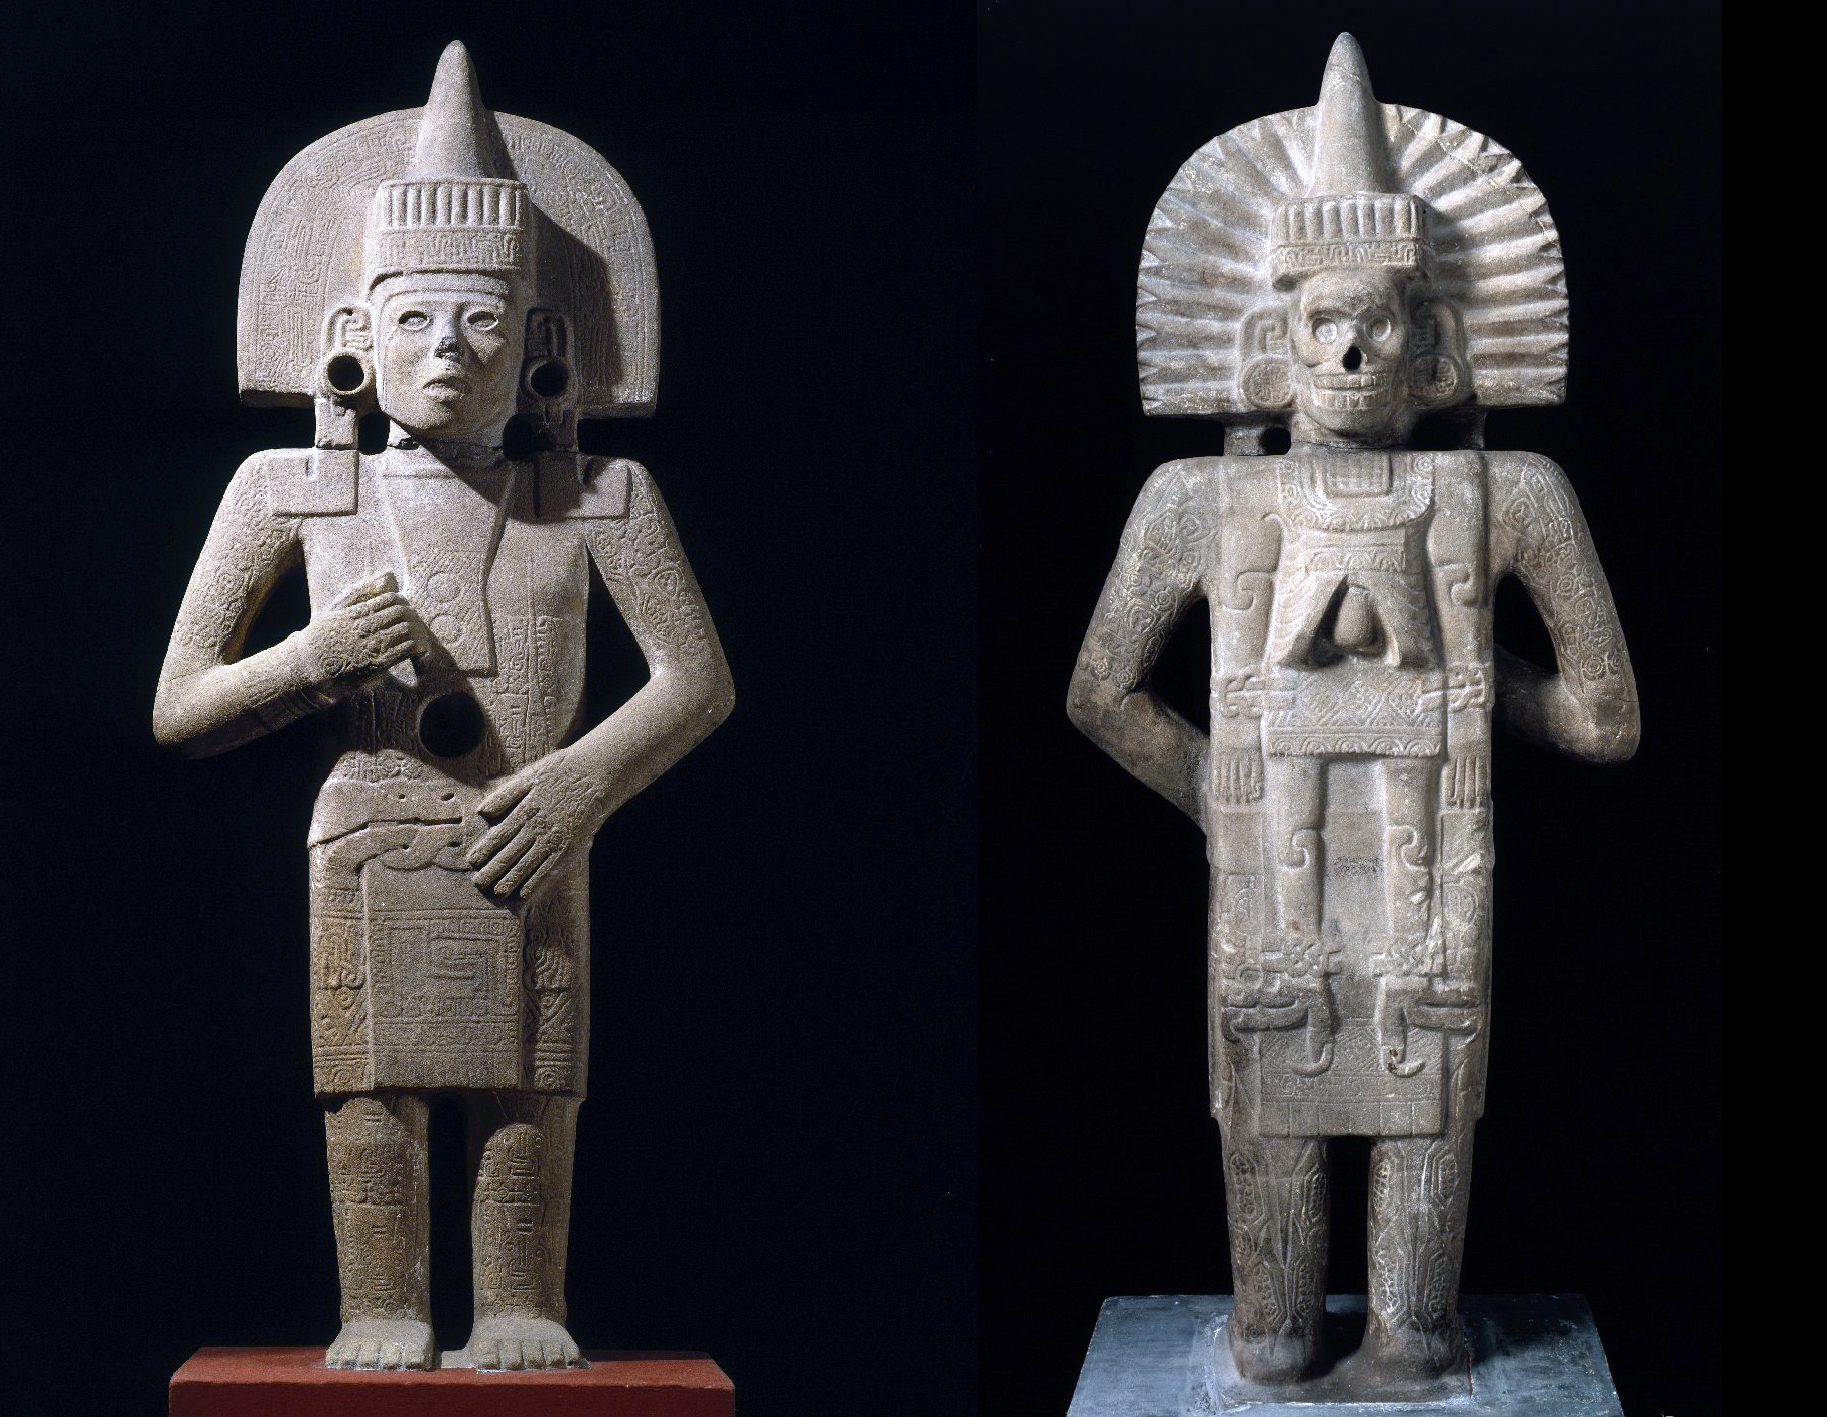 Life-Death Figure (front and back), c. 900–1250, Huastec (found between San Vicente Tancauyalab & Tamuin, San Luis Potosi, Northern Veracruz, Mexico), sandstone with traces of pigment, 158.4 x 66 x 29.2 cm (Brooklyn Museum)